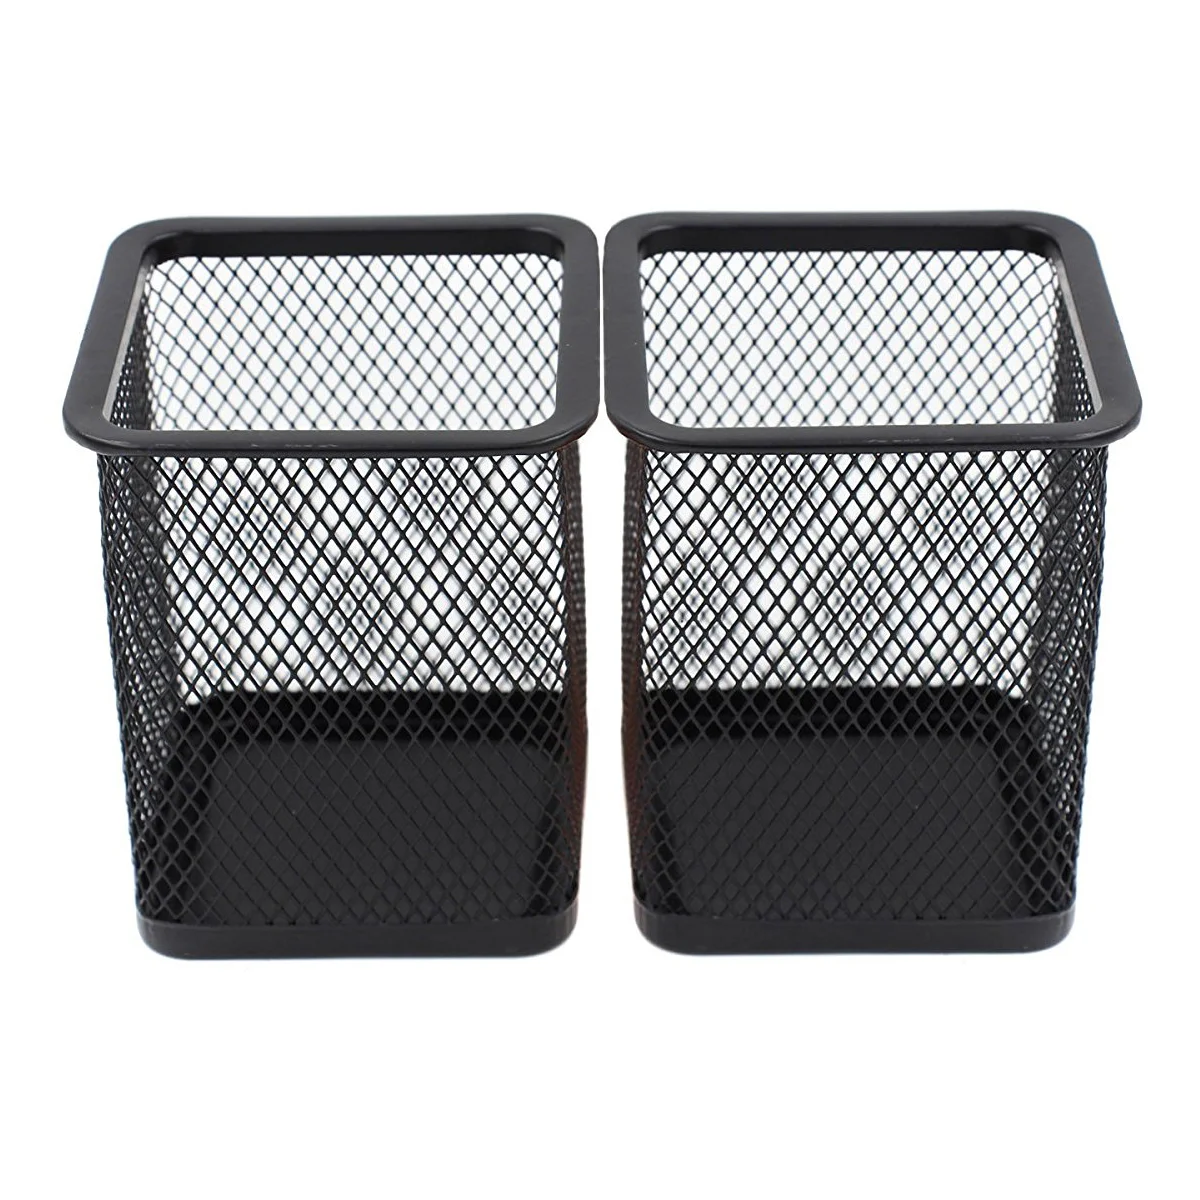 2 Pcs Holder Pencil Organizer Office Pot Desk Organizers and Accessories Mesh Brush Cup